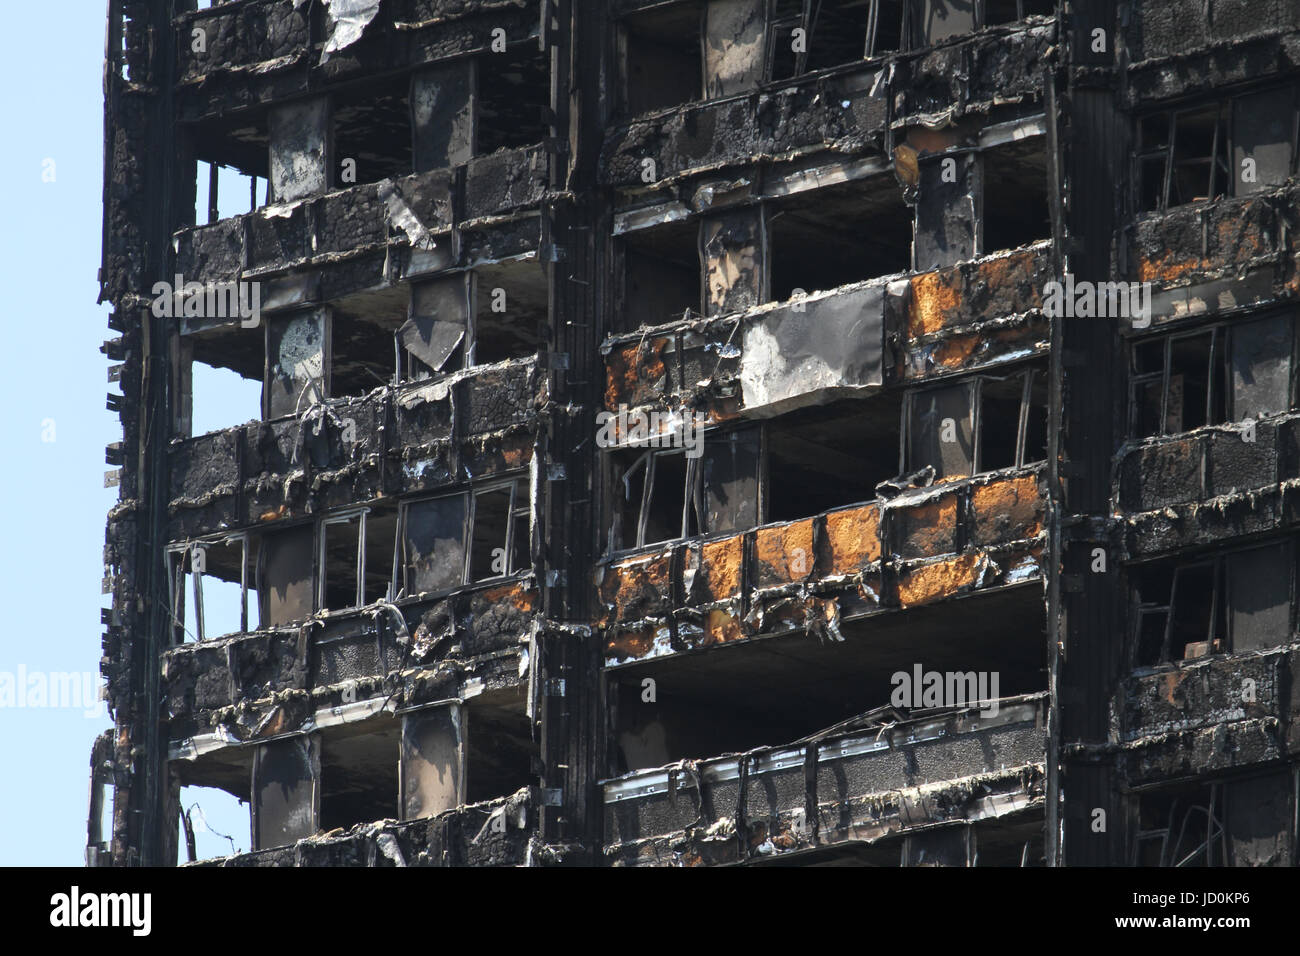 London, UK. 16th June, 2017. The charred remains of the 24-storey block Grenfell tower block located in the borough of Kensington and Chelsea where at least 30 people have bene confirmed dead with about 70 missing and feared dead. Credit: David Mbiyu/Alamy Live News  Stock Photo